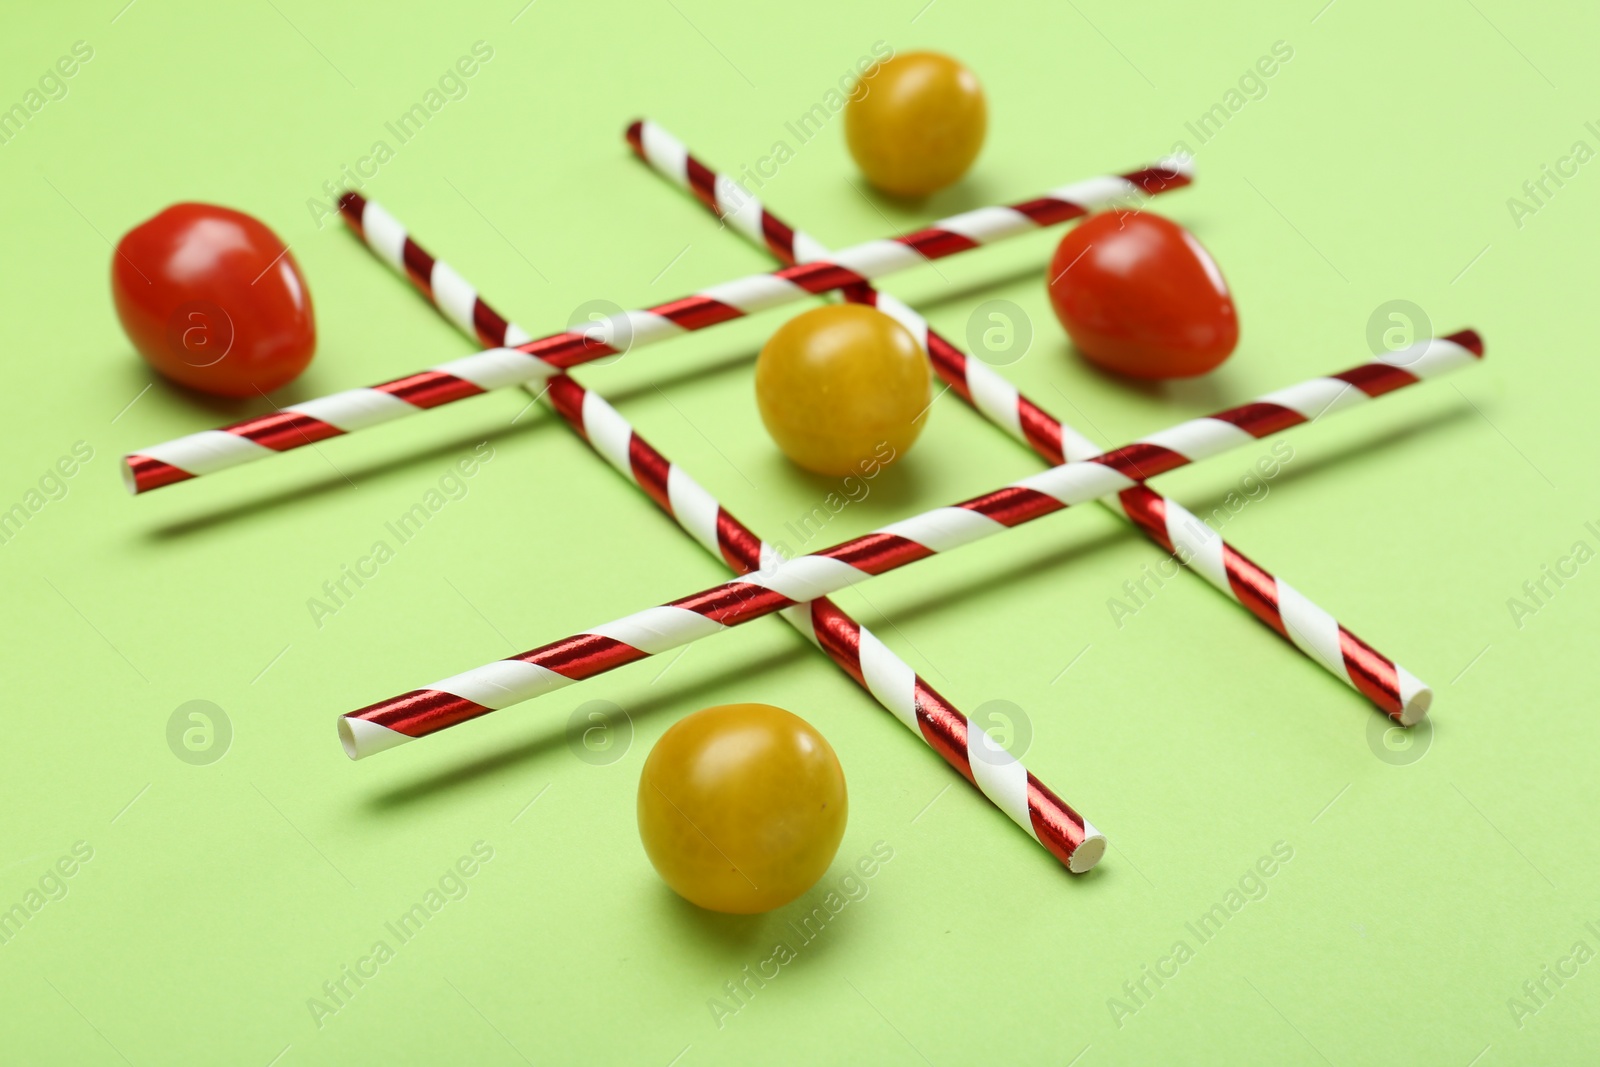 Photo of Tic tac toe game made with cherry tomatoes on light green background